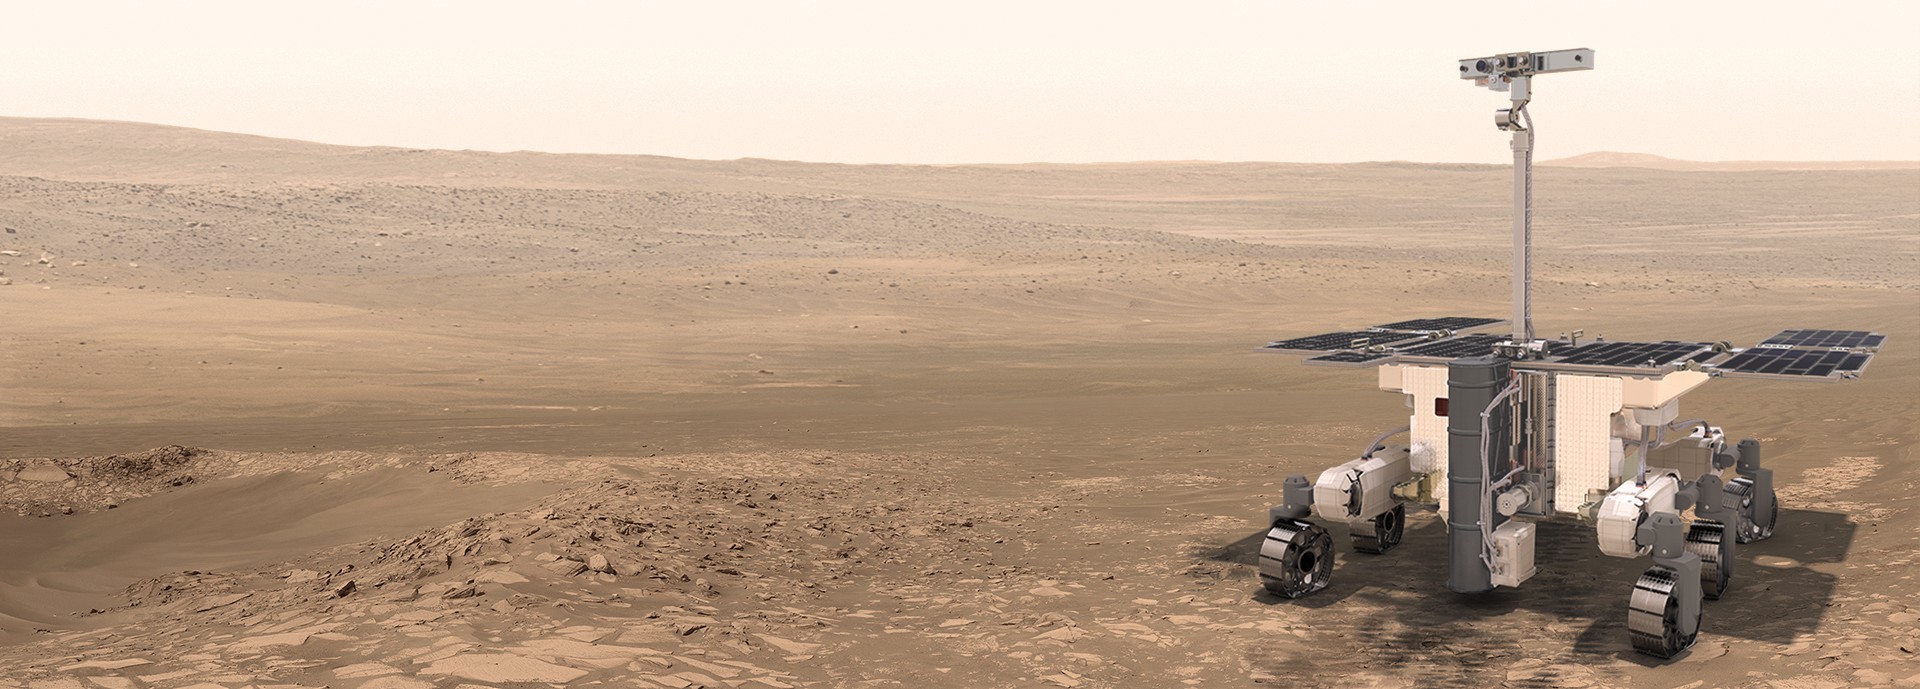 The ExoMars rover on Mars surface